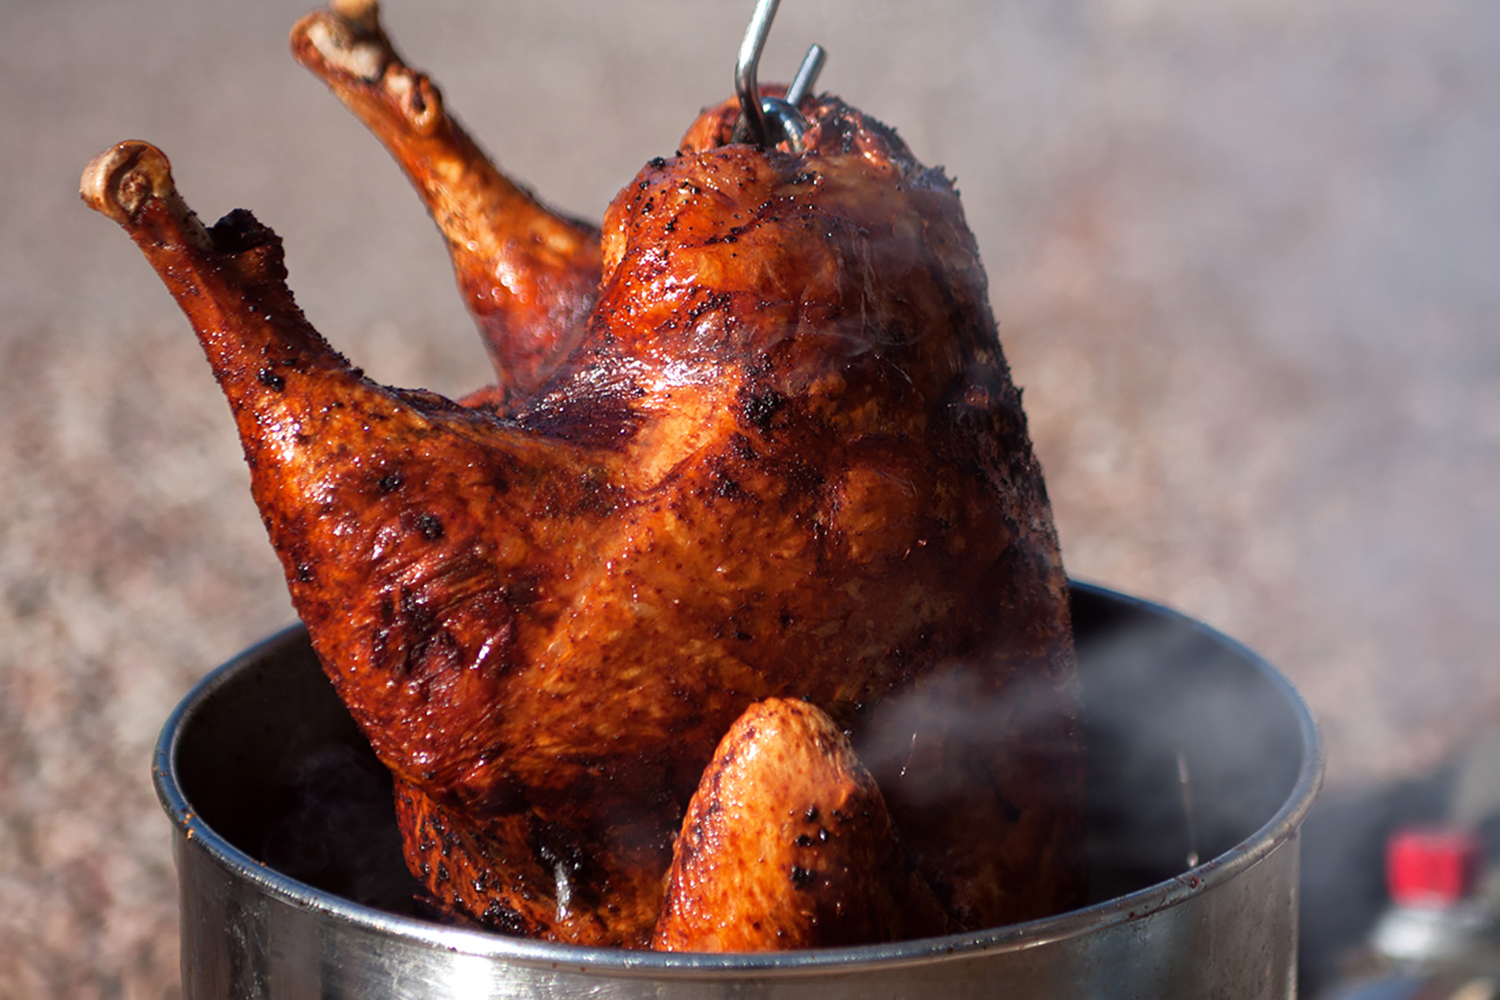 https://www.themanual.com/wp-content/uploads/sites/9/2018/11/how-to-deep-fry-a-turkey-feature.jpg?p=1